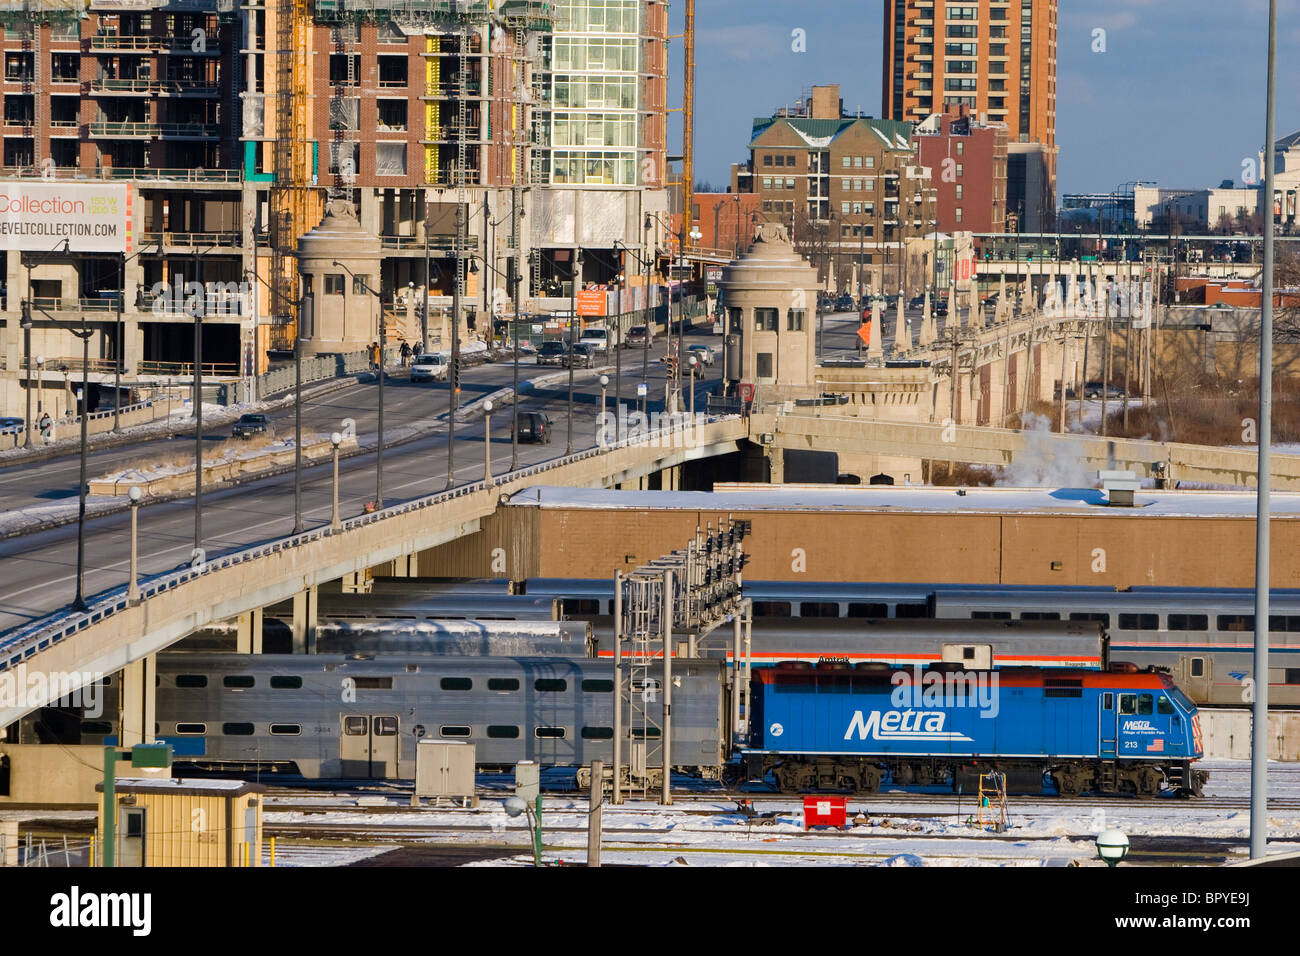 A Metra commuter train heads into Union Station in Chicago, IL. Stock Photo